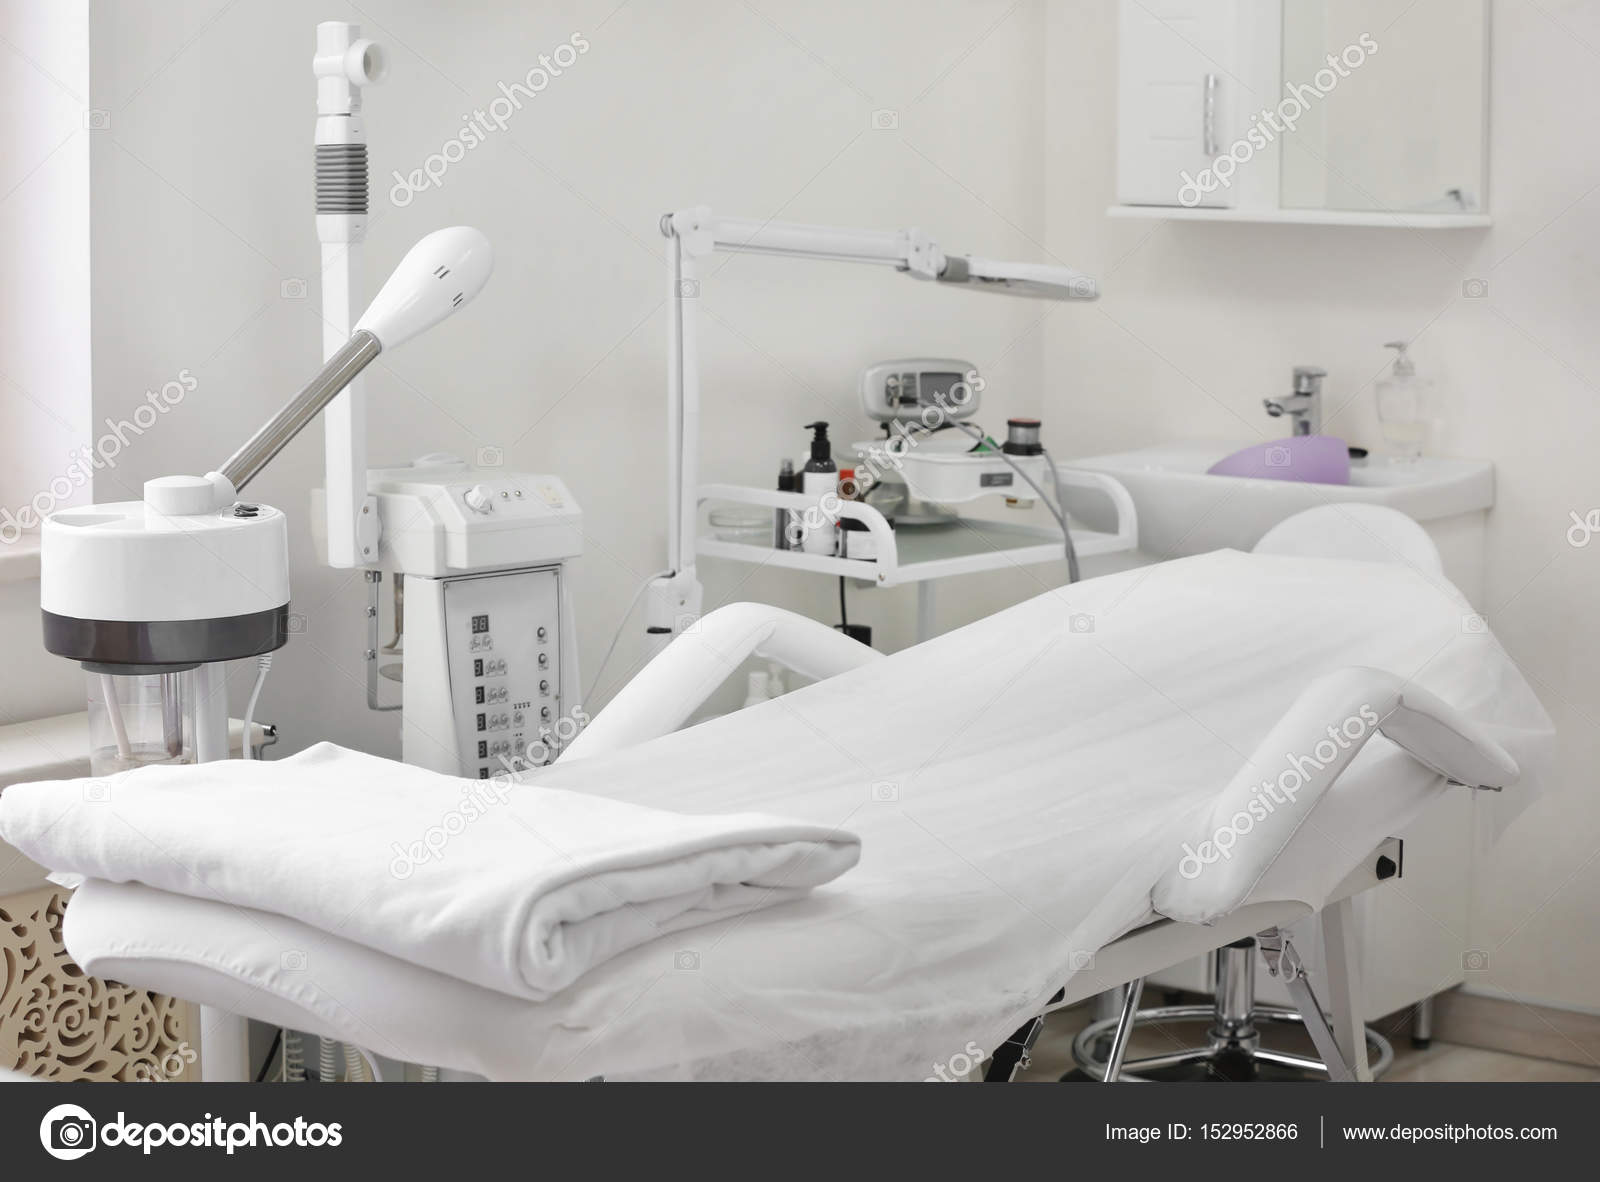 Dermatology Clinic With Modern Equipment Stock Photo